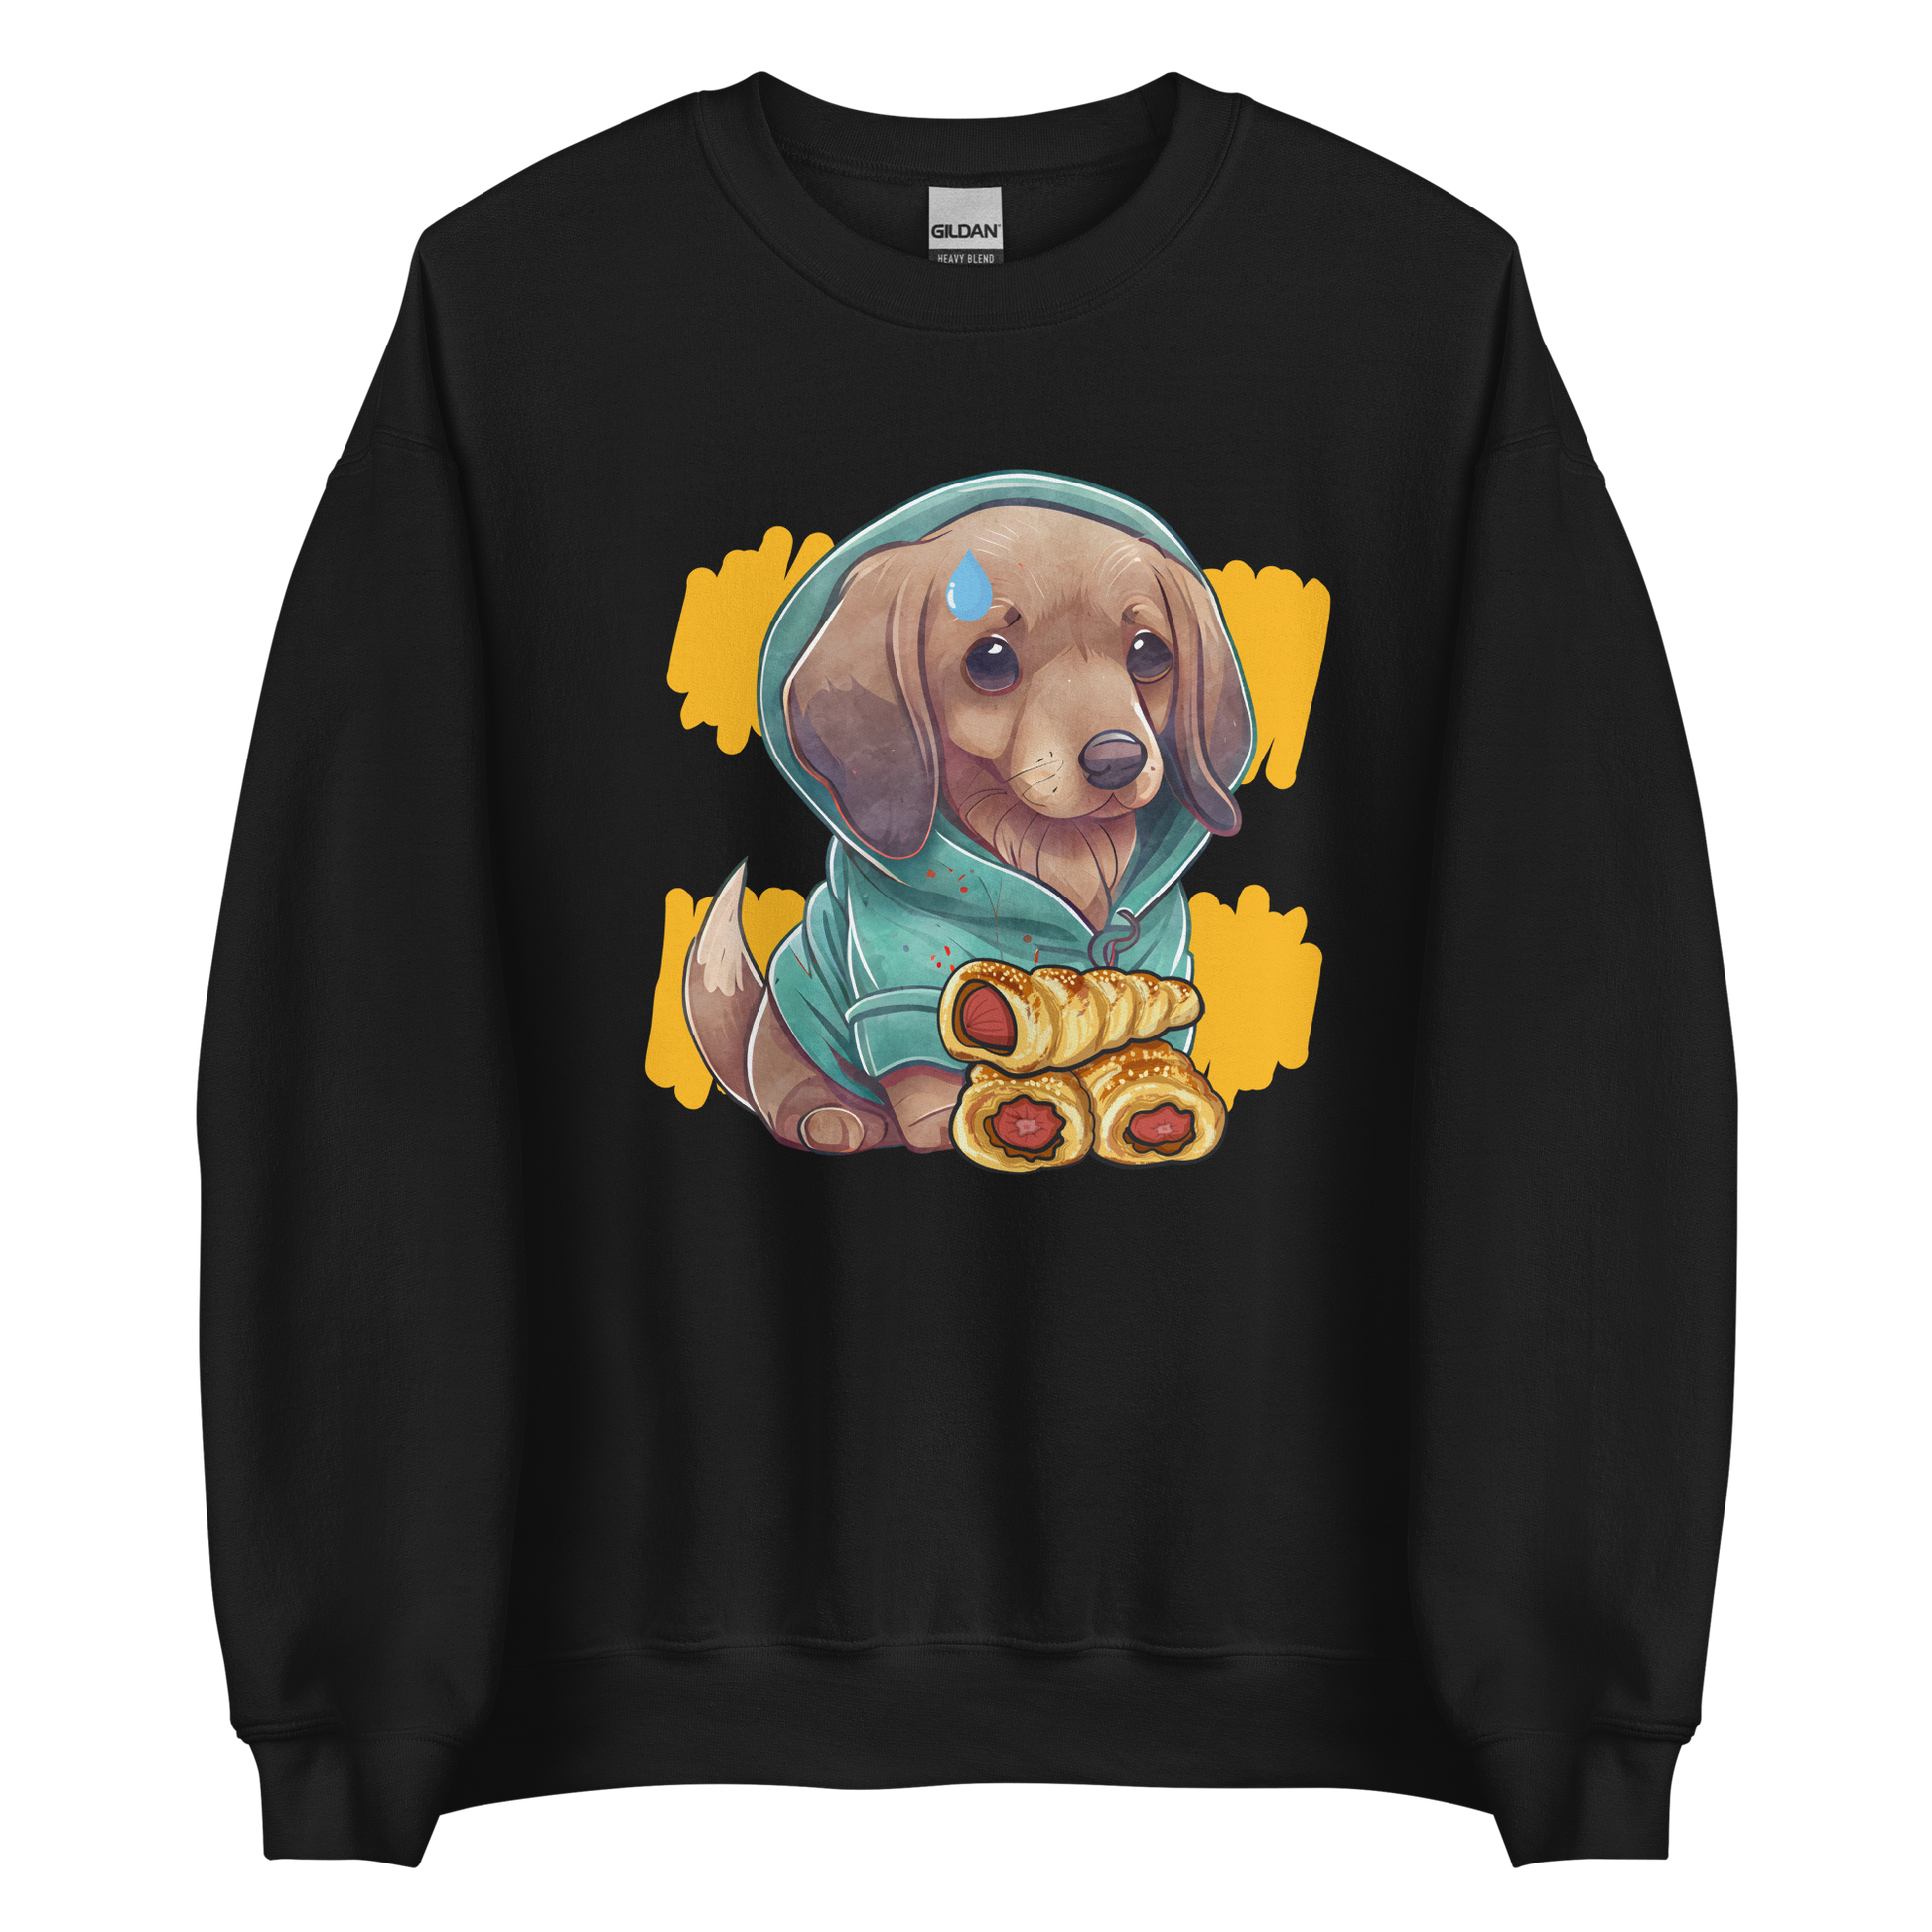 Black Sausage Dog Sweatshirt featuring an adorable Sausage Roll Dachshund graphic on the chest - Funny Graphic Sausage Dog Sweatshirts - Boozy Fox